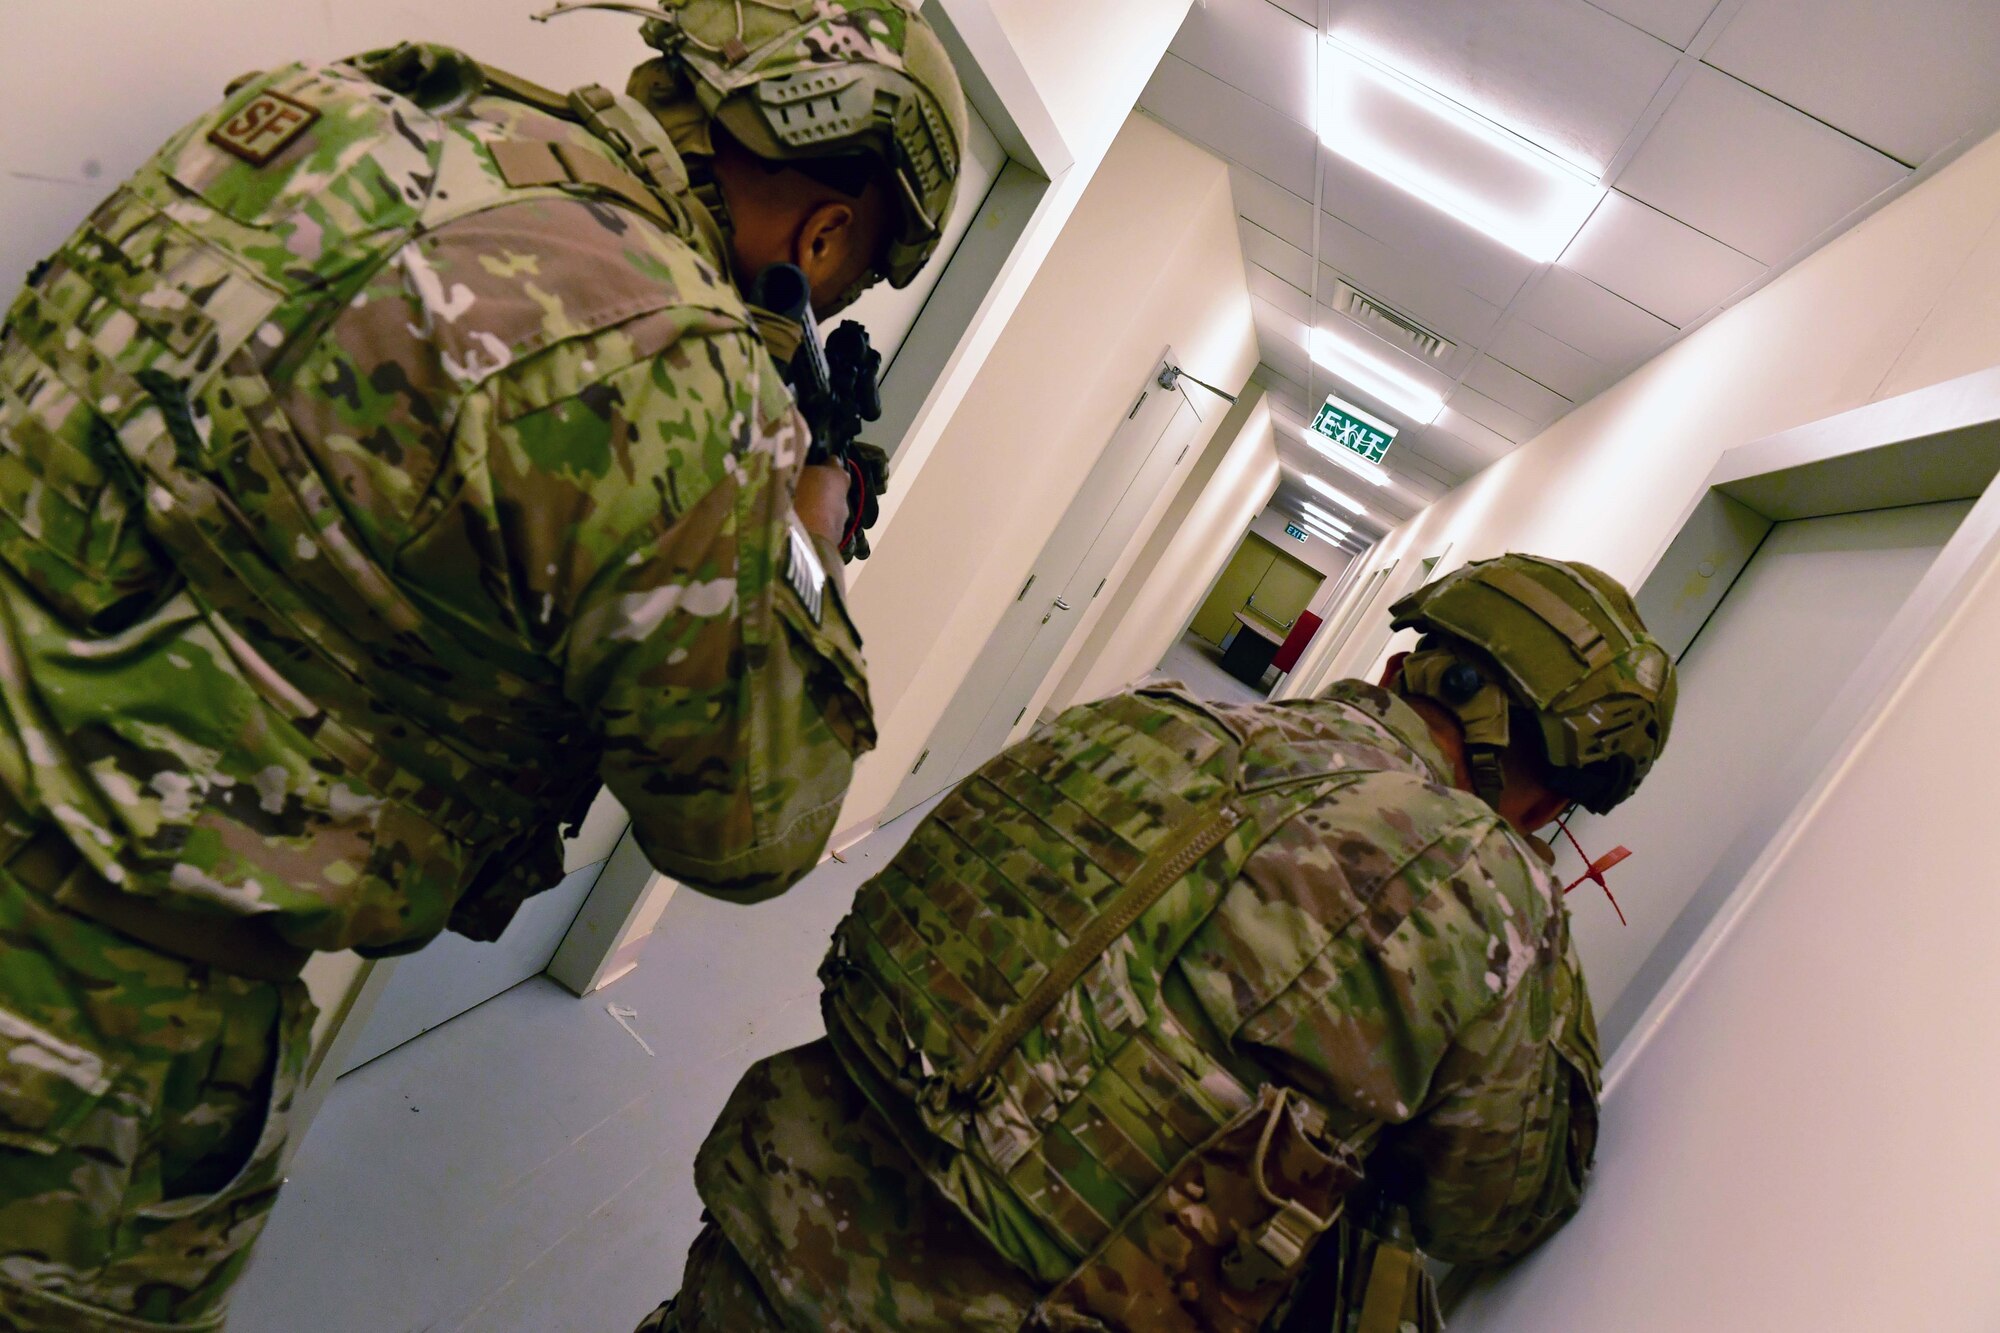 Airmen from the 332d Air Expeditionary Wing Security Forces Squadron participated in an active shooter operations rehearsal at an undisclosed location in Southwest Asia, Jan. 31, 2023.  The rehearsal served as training for a possible real world scenario where either an insider or outsider threat may occur.